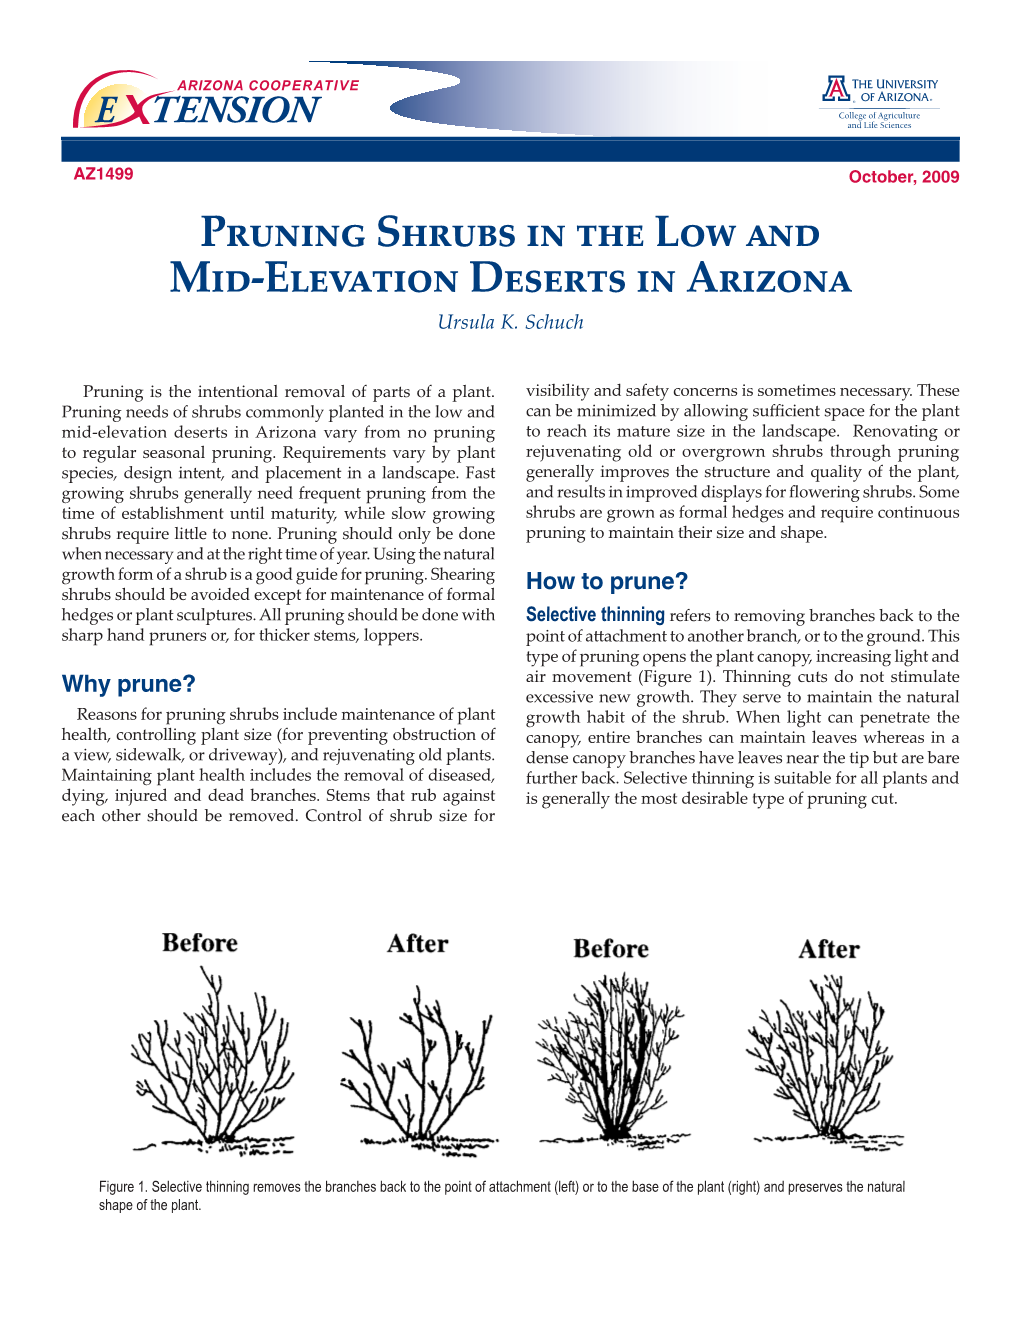 Pruning Shrubs in the Low and Mid-Elevation Deserts in Arizona Ursula K